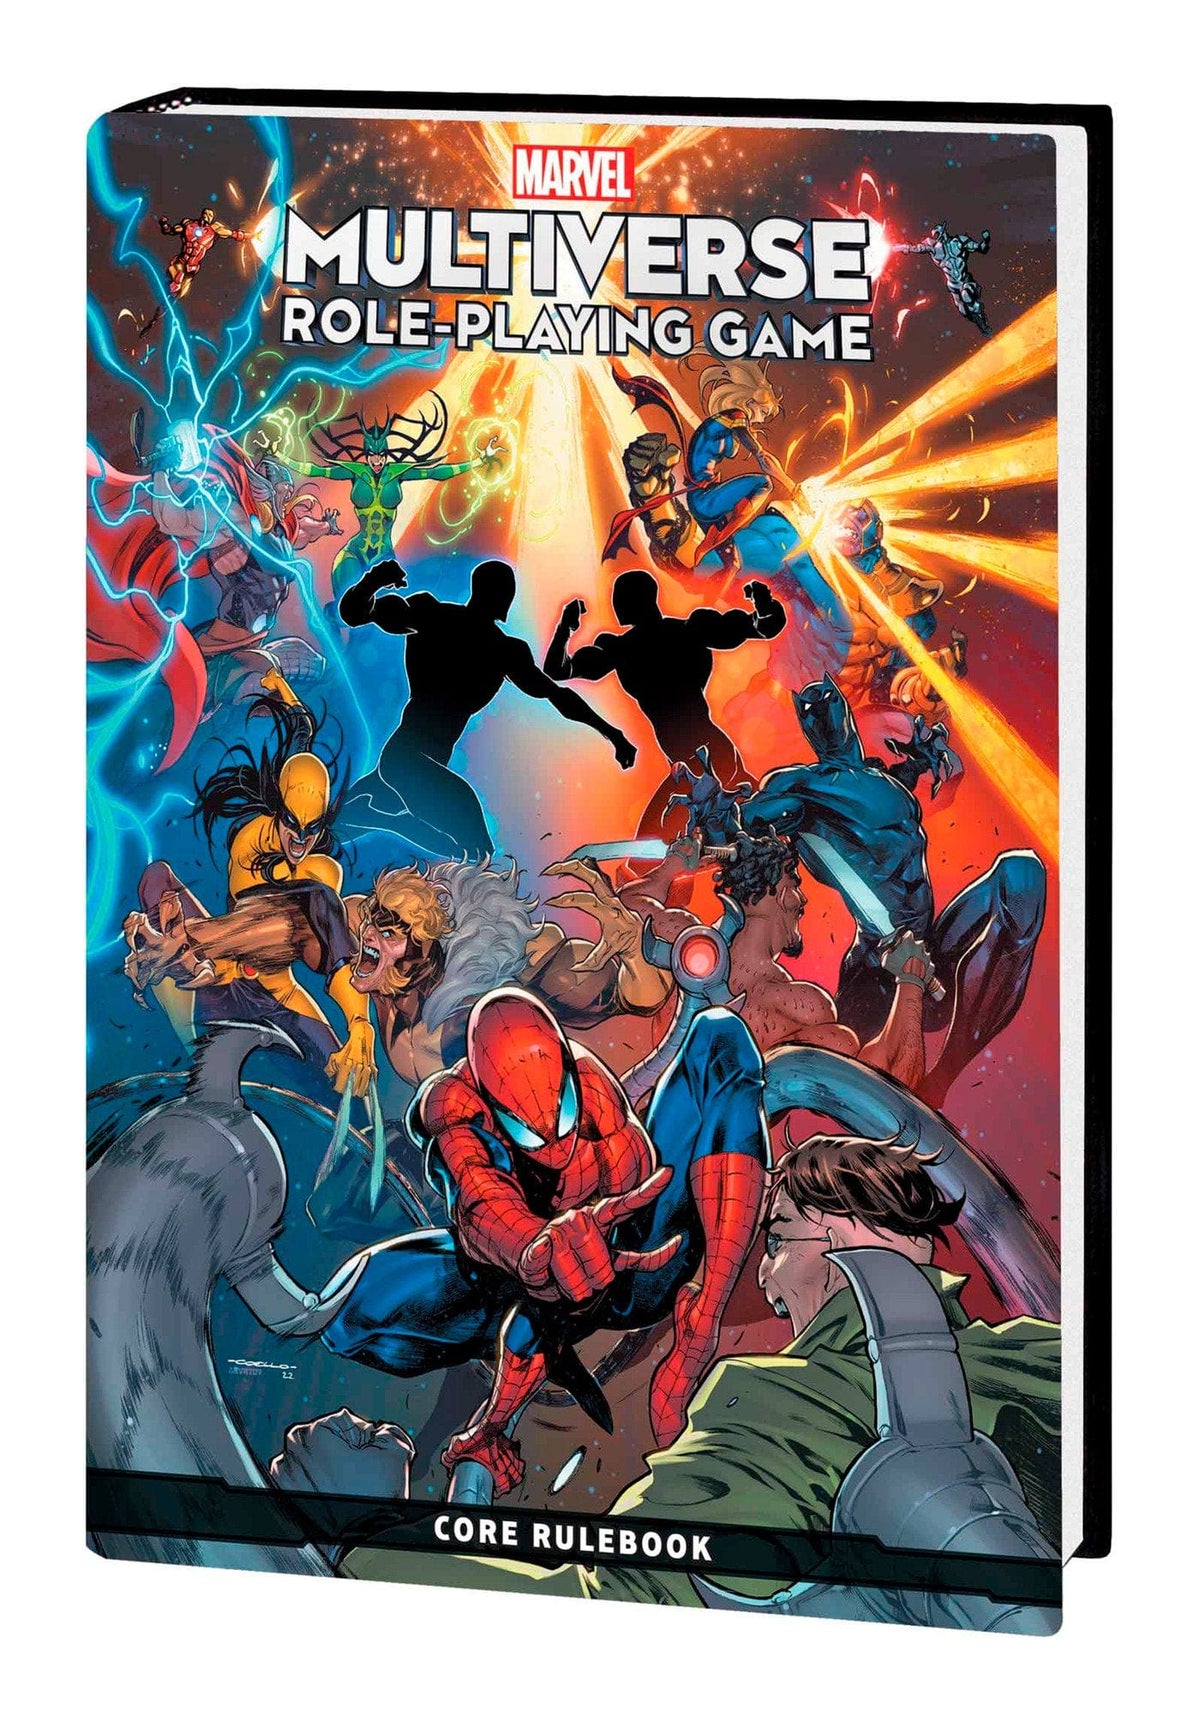 MARVEL MULTIVERSE ROLE-PLAYING GAME CORE RULEBOOK - Third Eye